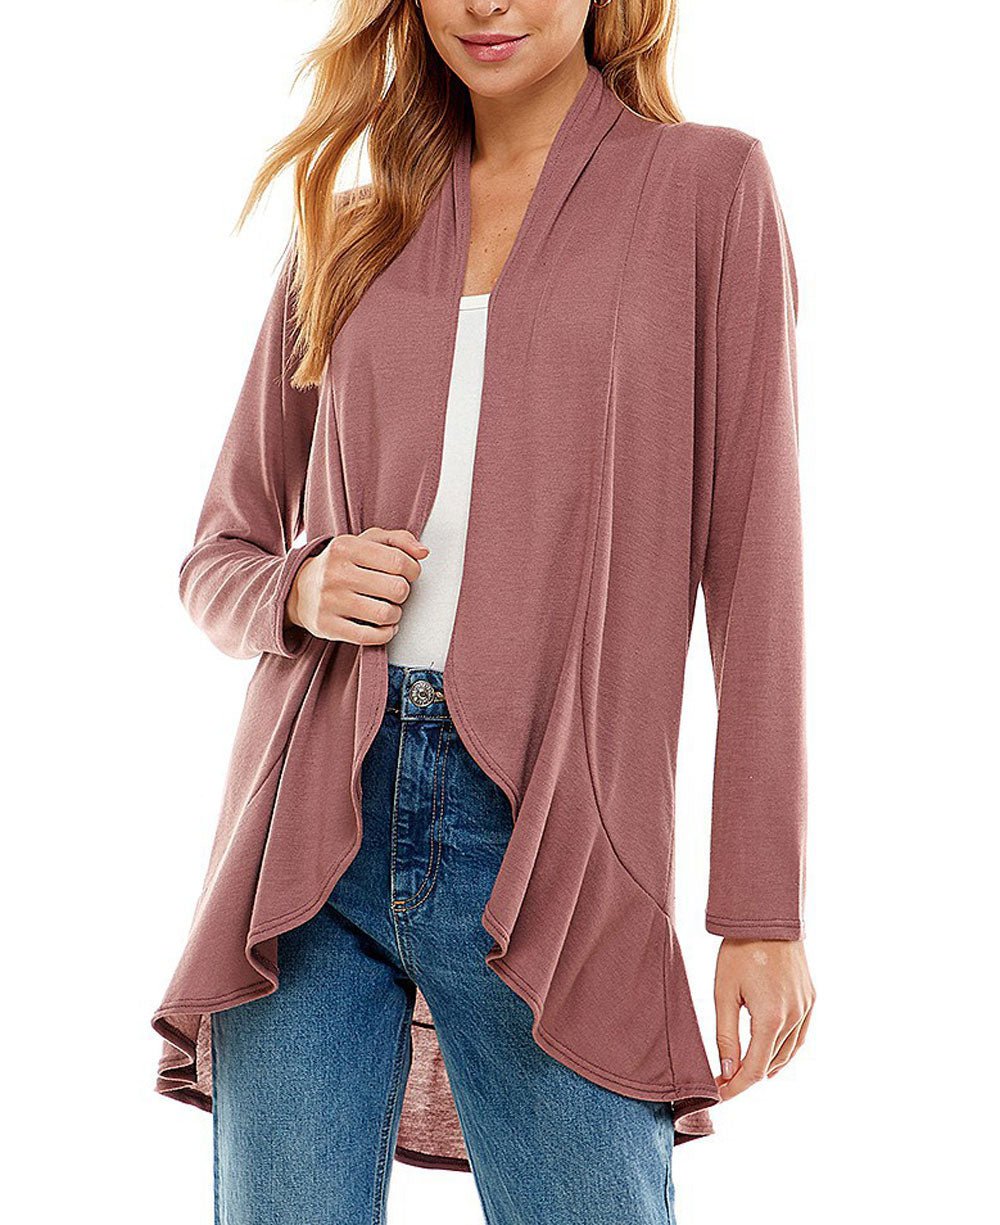 Light Weight Tree of Life Design Women's Long Sleeves Ruffle Cardigan in Dusty Rose - Shirts & Tops S